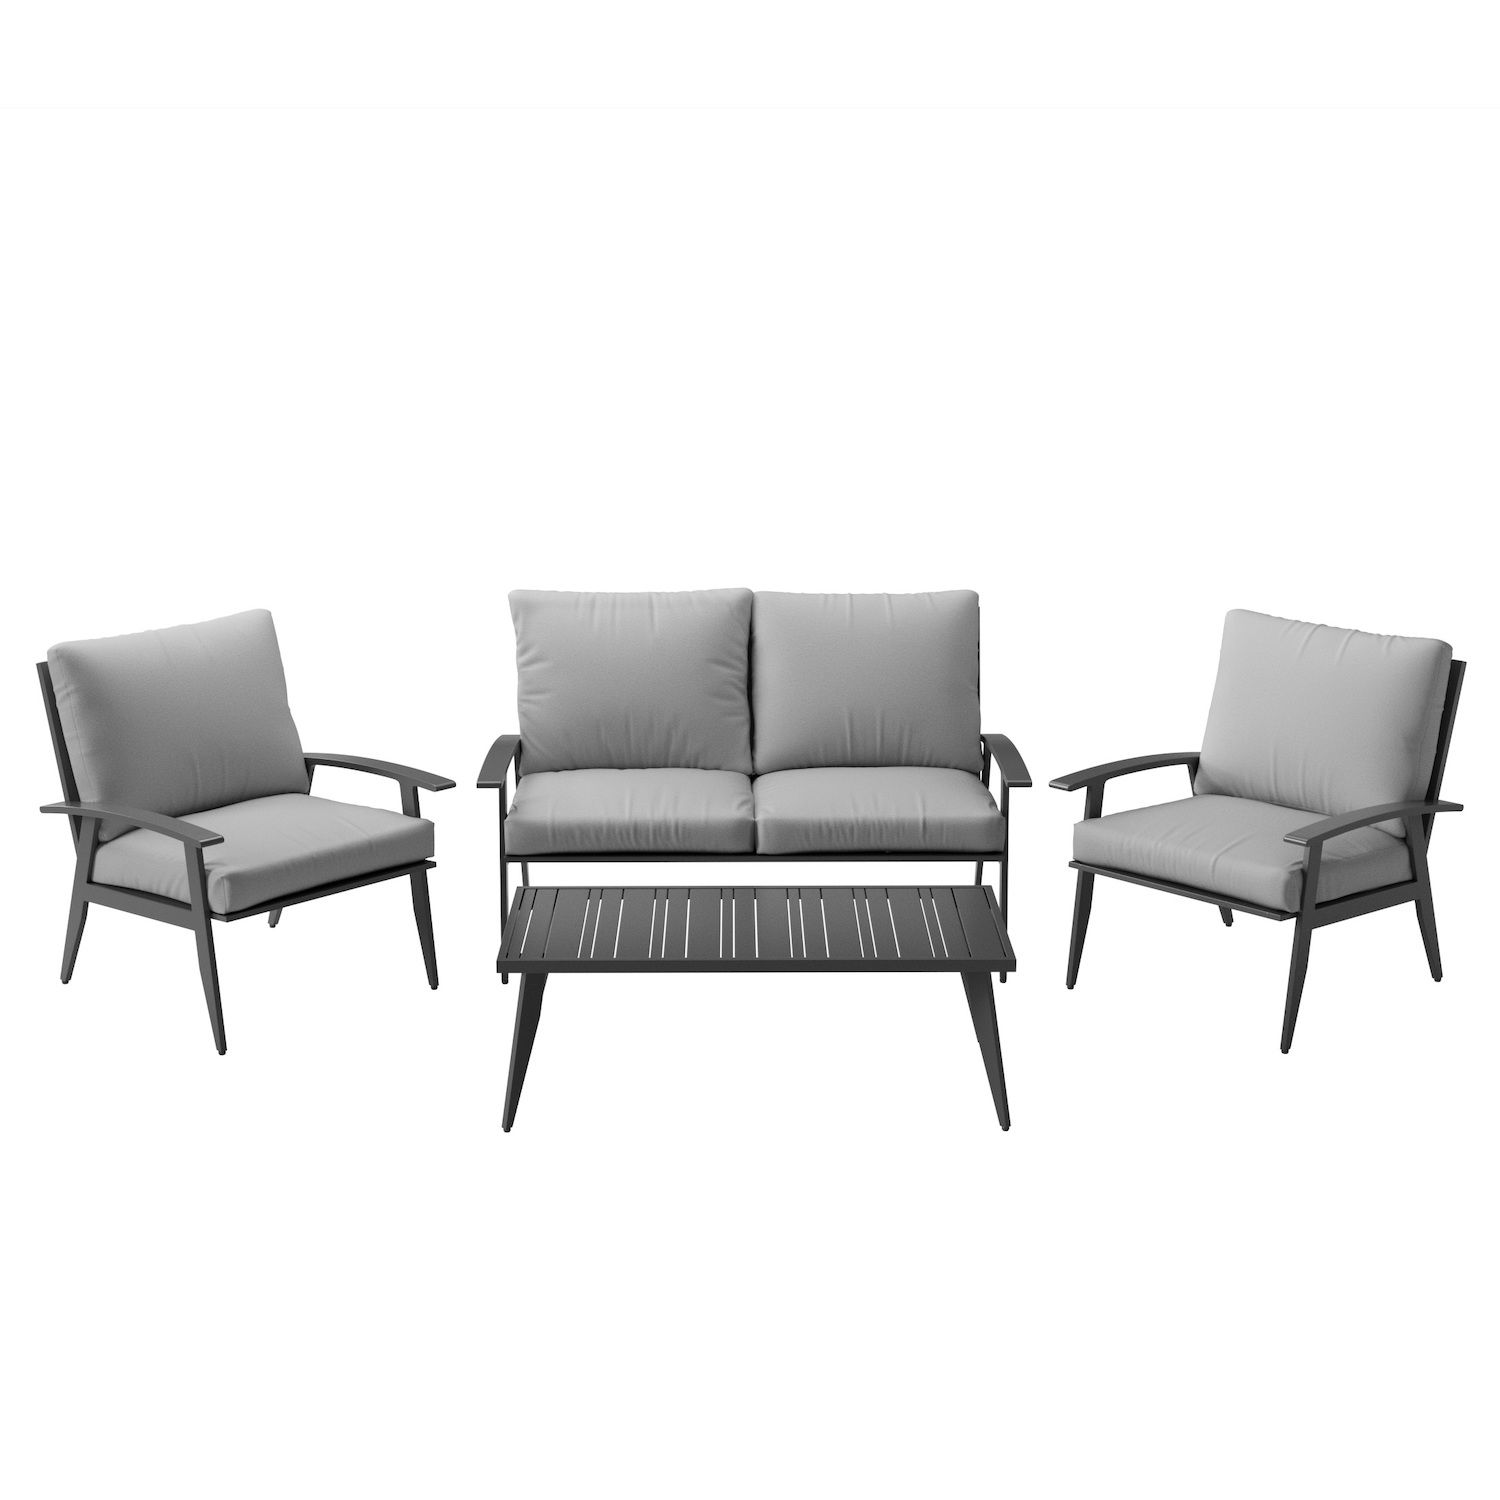 Image for Dream Collection Outdoor Gray Conversation Chair, Loveseat, & Coffee Table 4-piece Set at Kohl's.